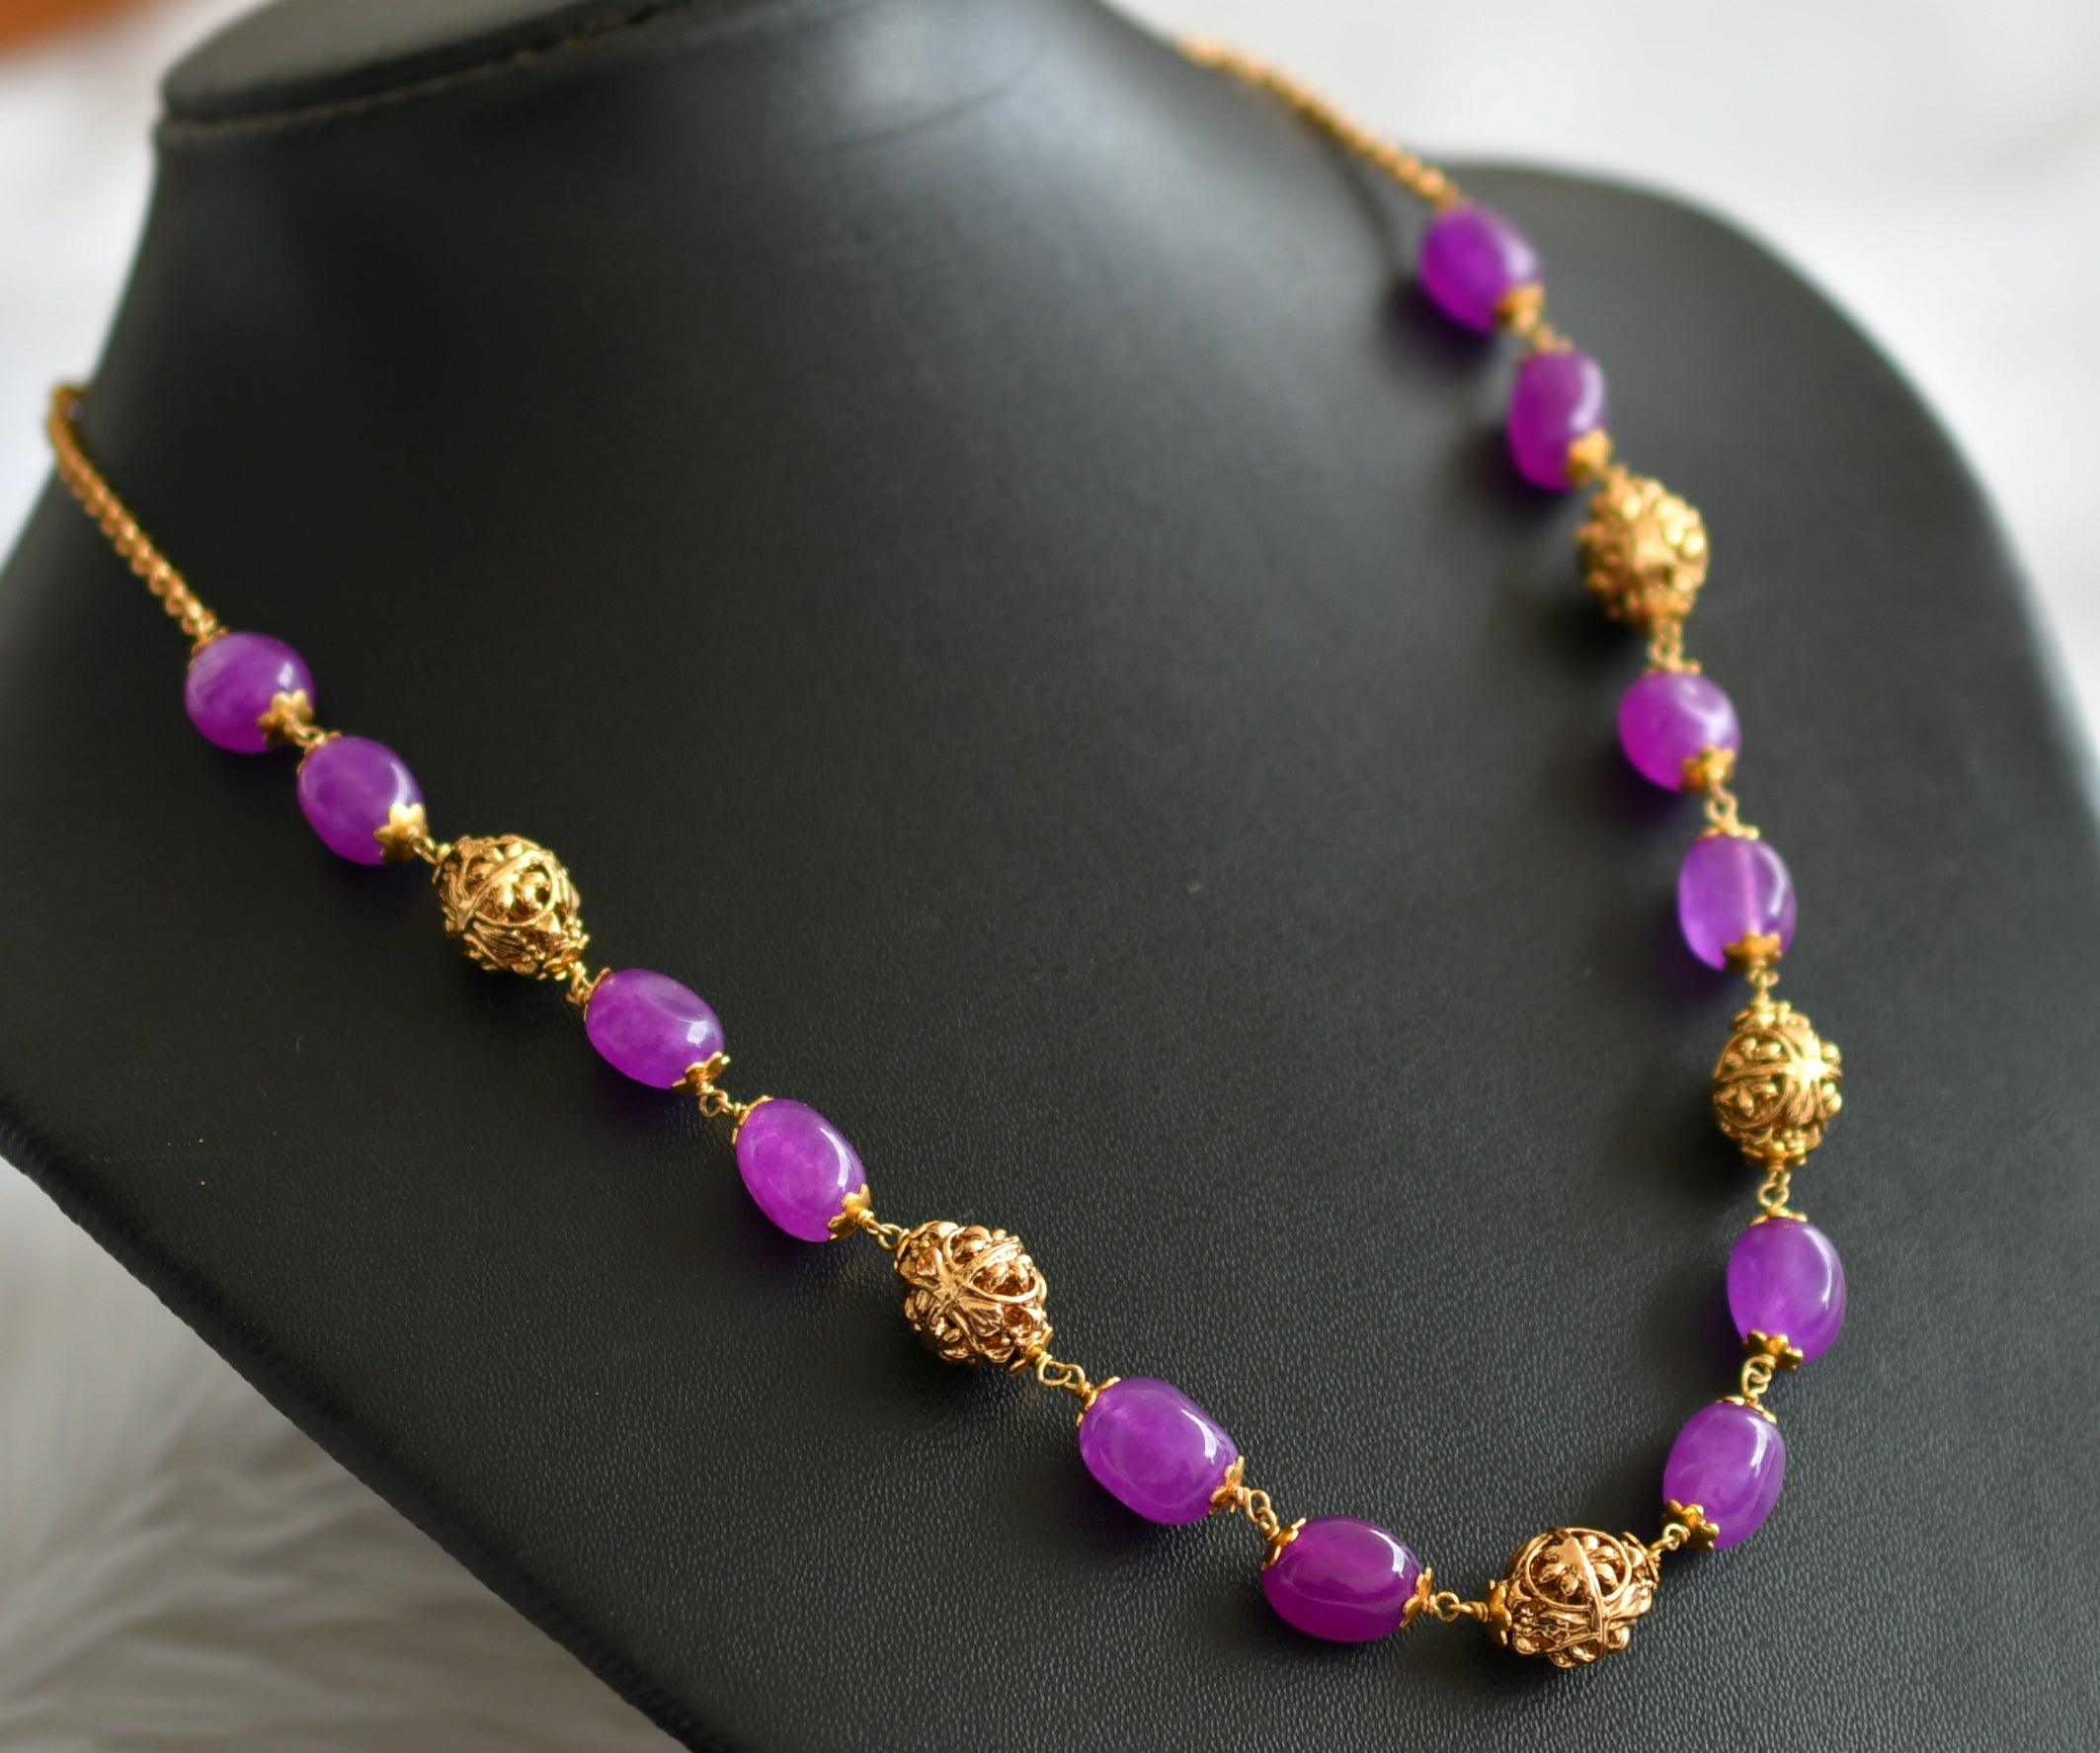 Natural Beauty Purple Turquoise Necklace Featuring 3 Strands Of Over 200  Beads With A Generously Sized Pear-Shaped Center Stone & Button Closure